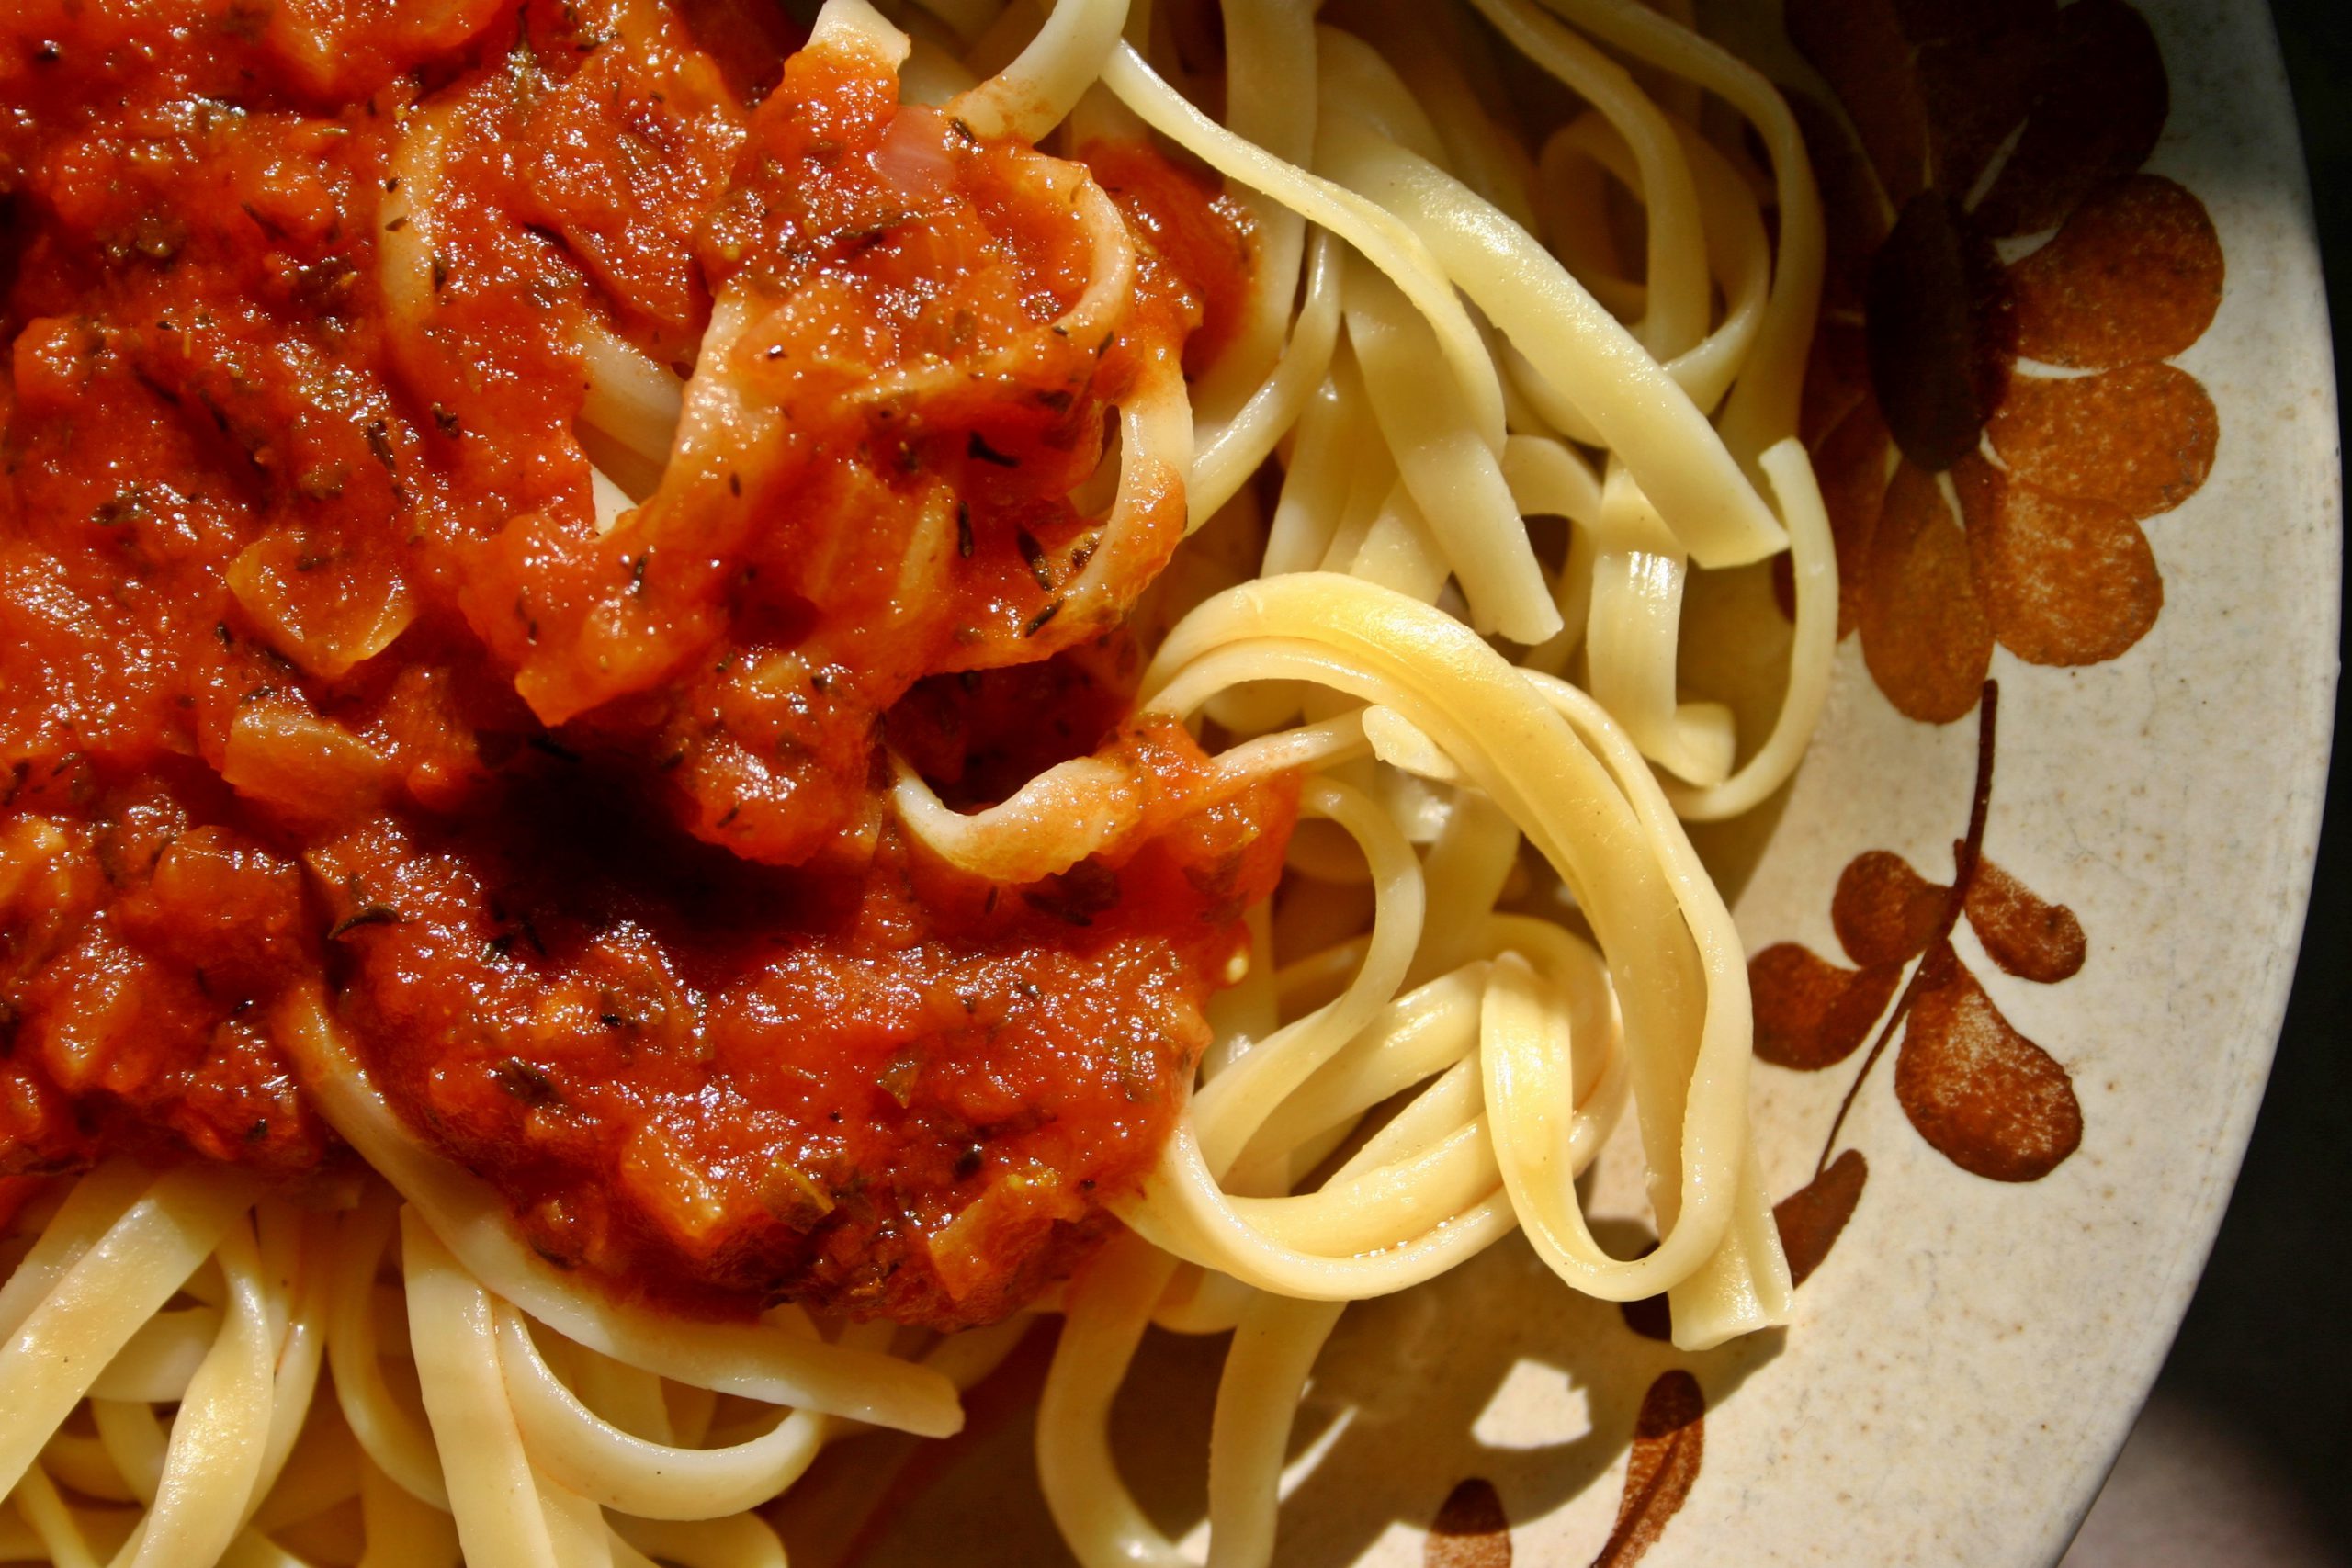 Plate of pasta with sauce.